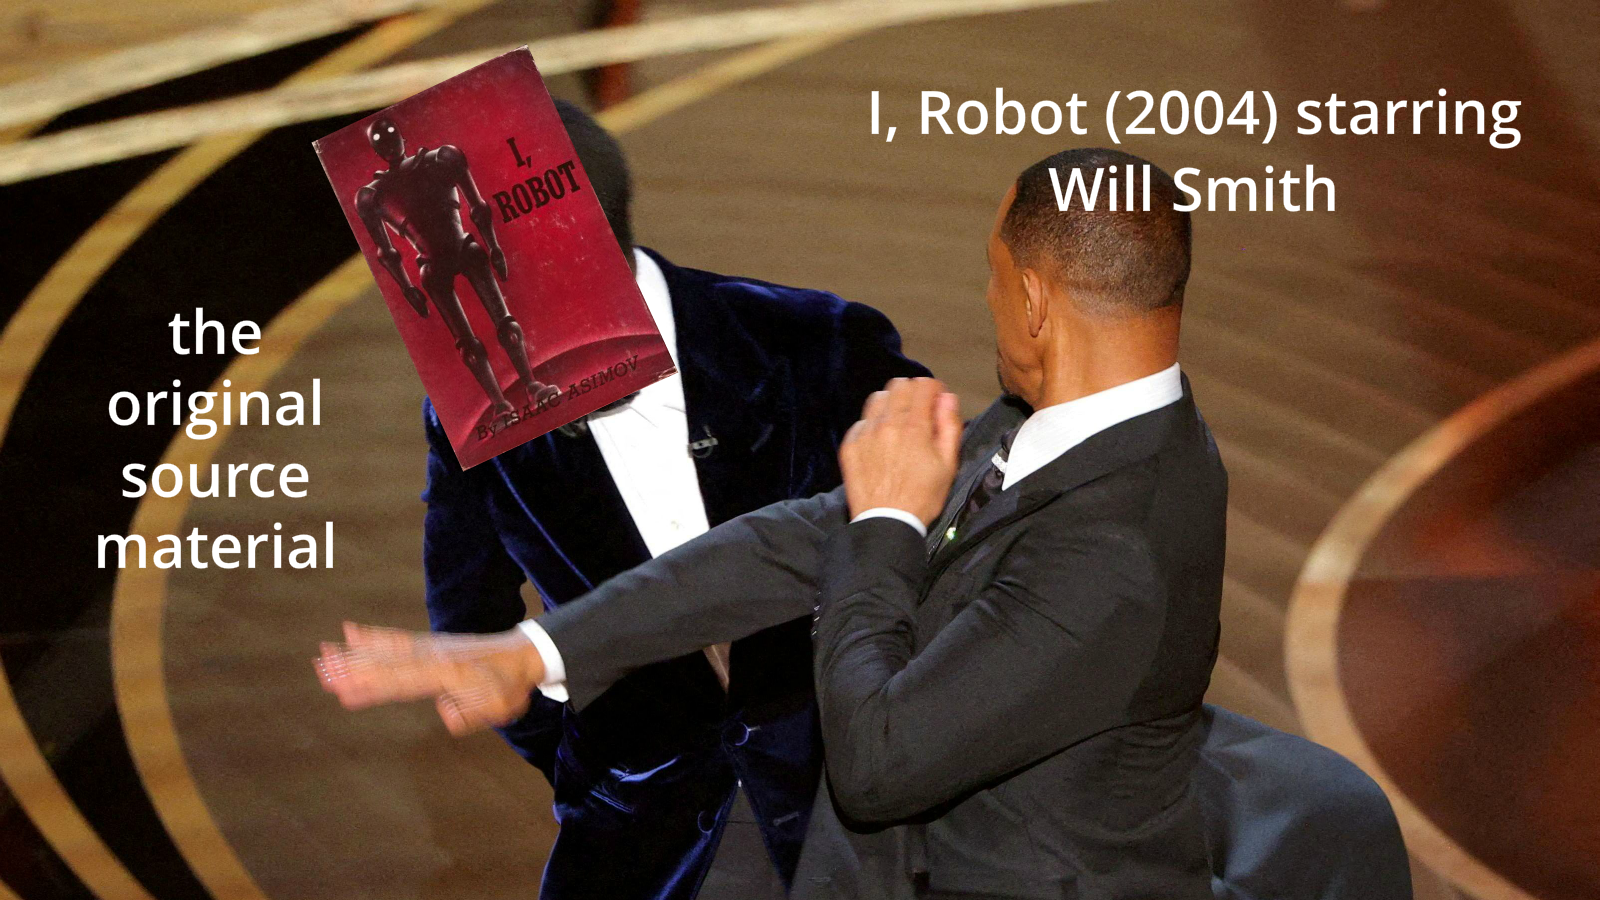 Photo of Will Smith slapping the original "I, Robot" story collection by Isaac Asimov